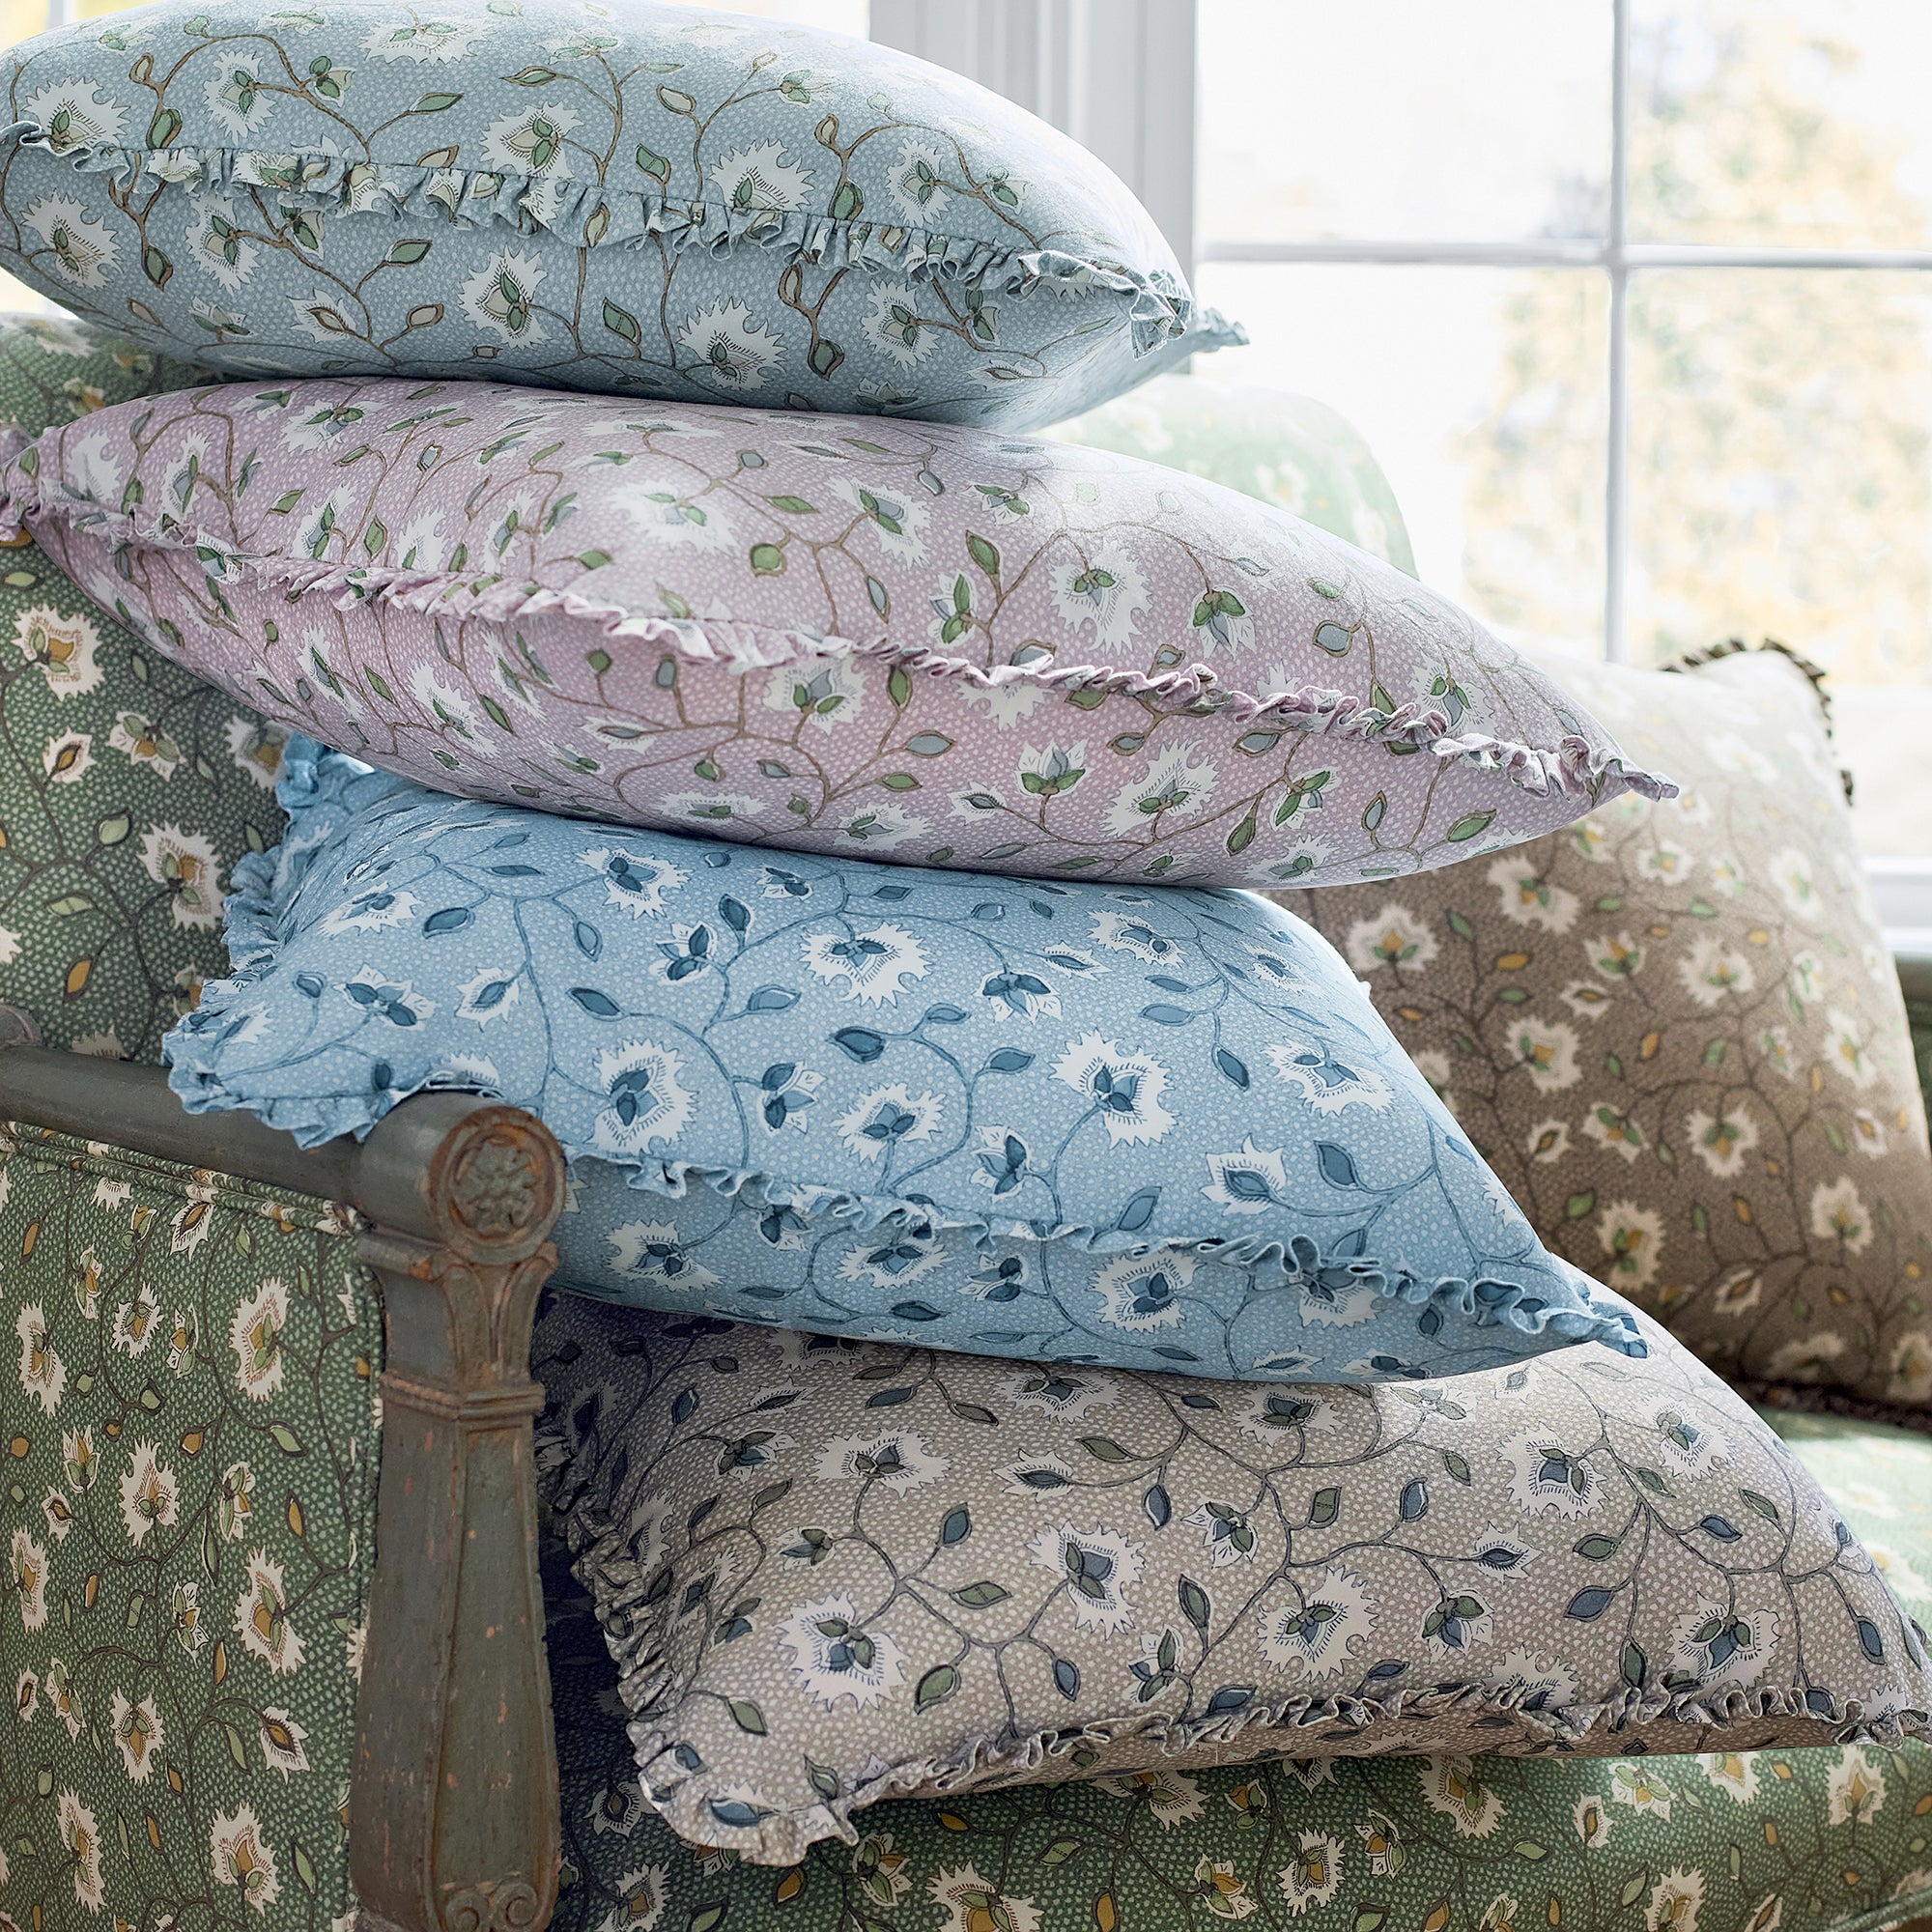 Collection of Settee and pillow fabrics in Chelsea printed fabric featuring lavender color fabric - pattern number AF57840 - by Anna French in the Bristol collection